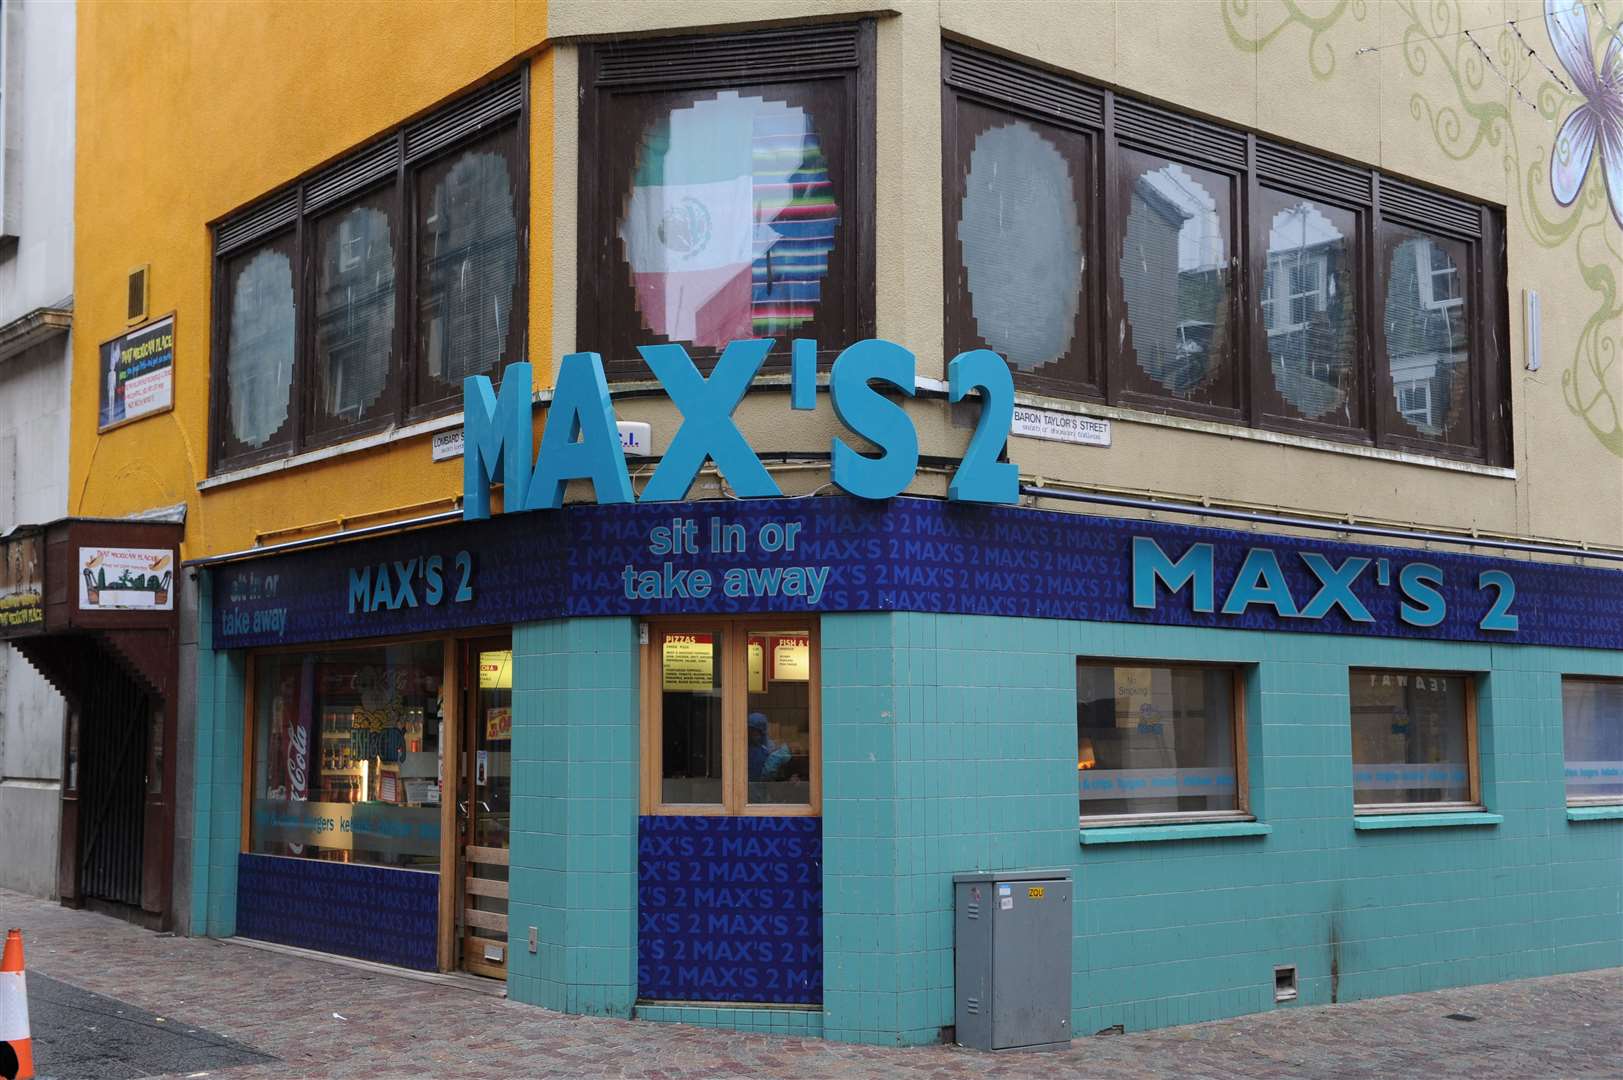 Immigration enforcement officers arrested a man at Max's 2 in Inverness.